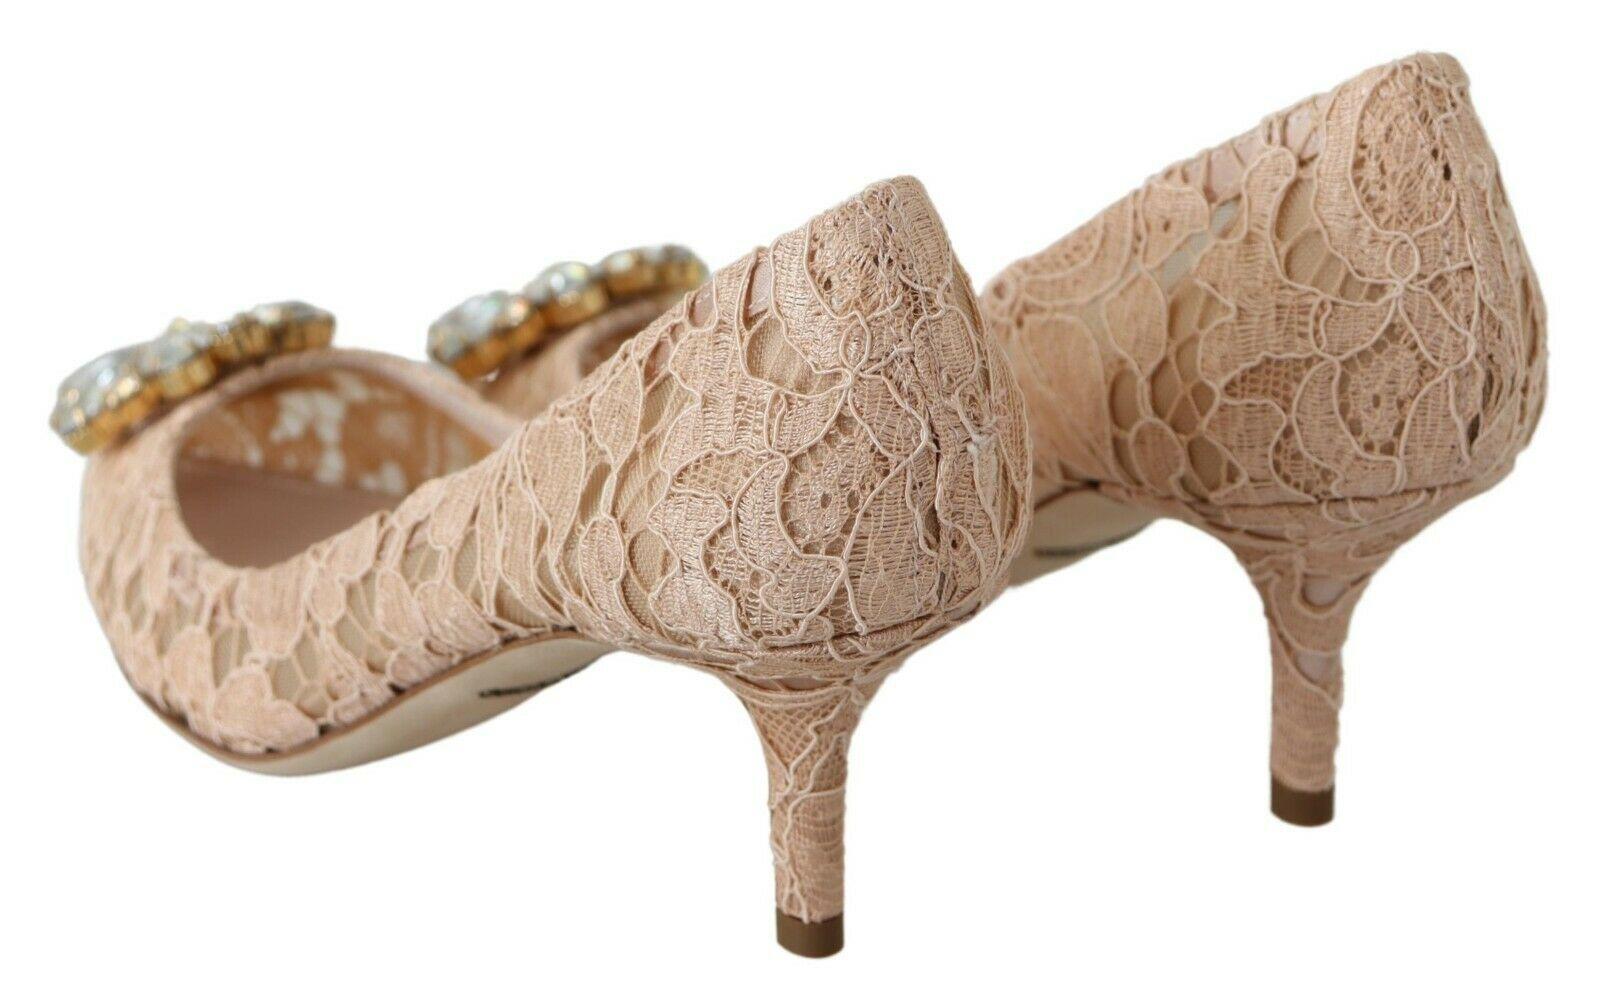 Women's Dolce & Gabbana Pink Floral Lace Pumps Shoes Low Heels With Jewels Crystals DG